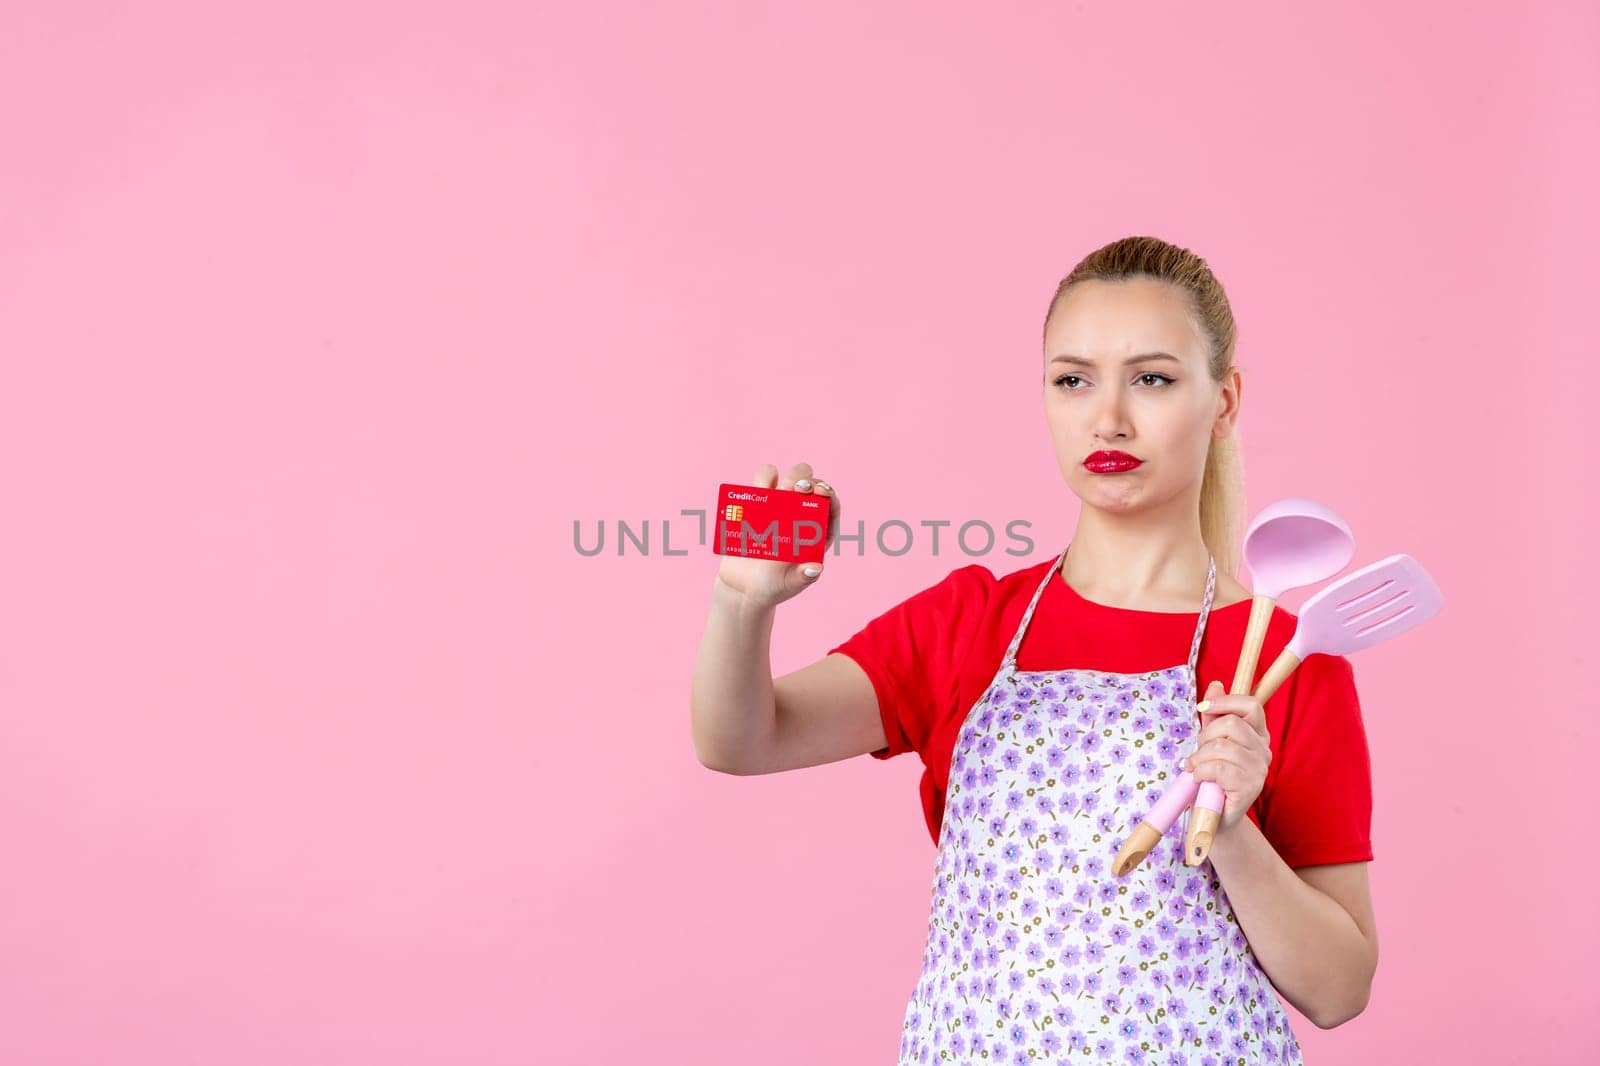 front view young housewife in cape holding spoons and bank card on pink background profession occupation duty money wife uniform job cutlery worker horizontal